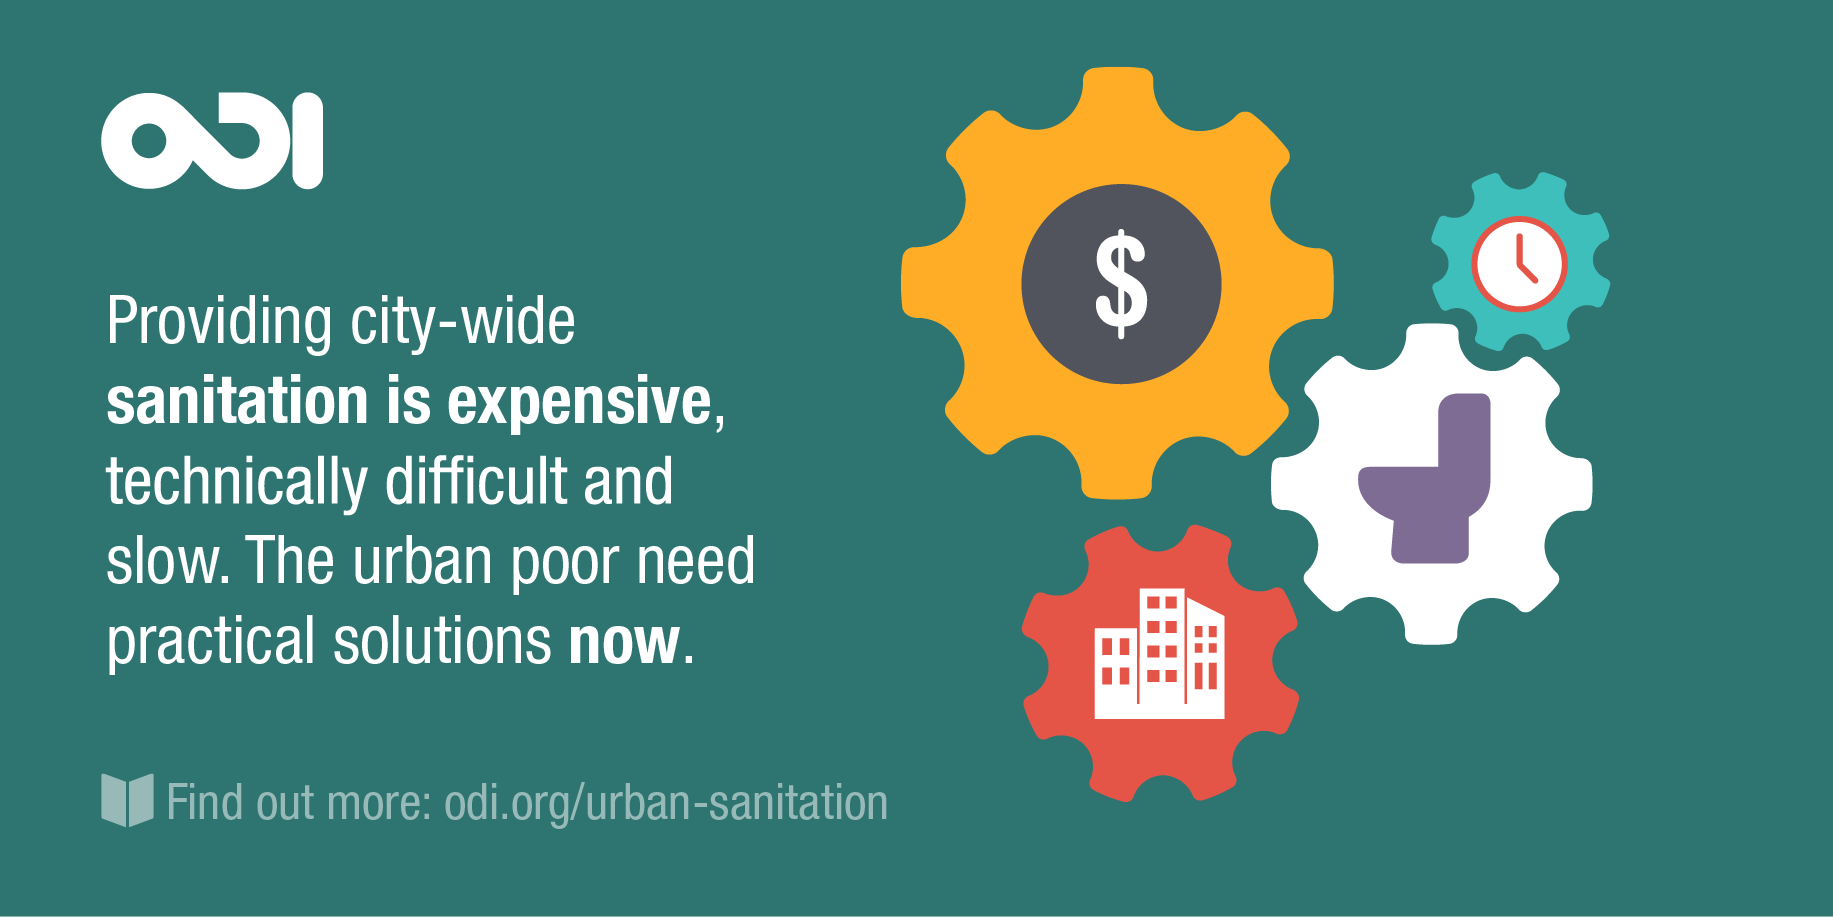 Providing city-wide sanitation is expensive, technically difficult and slow.